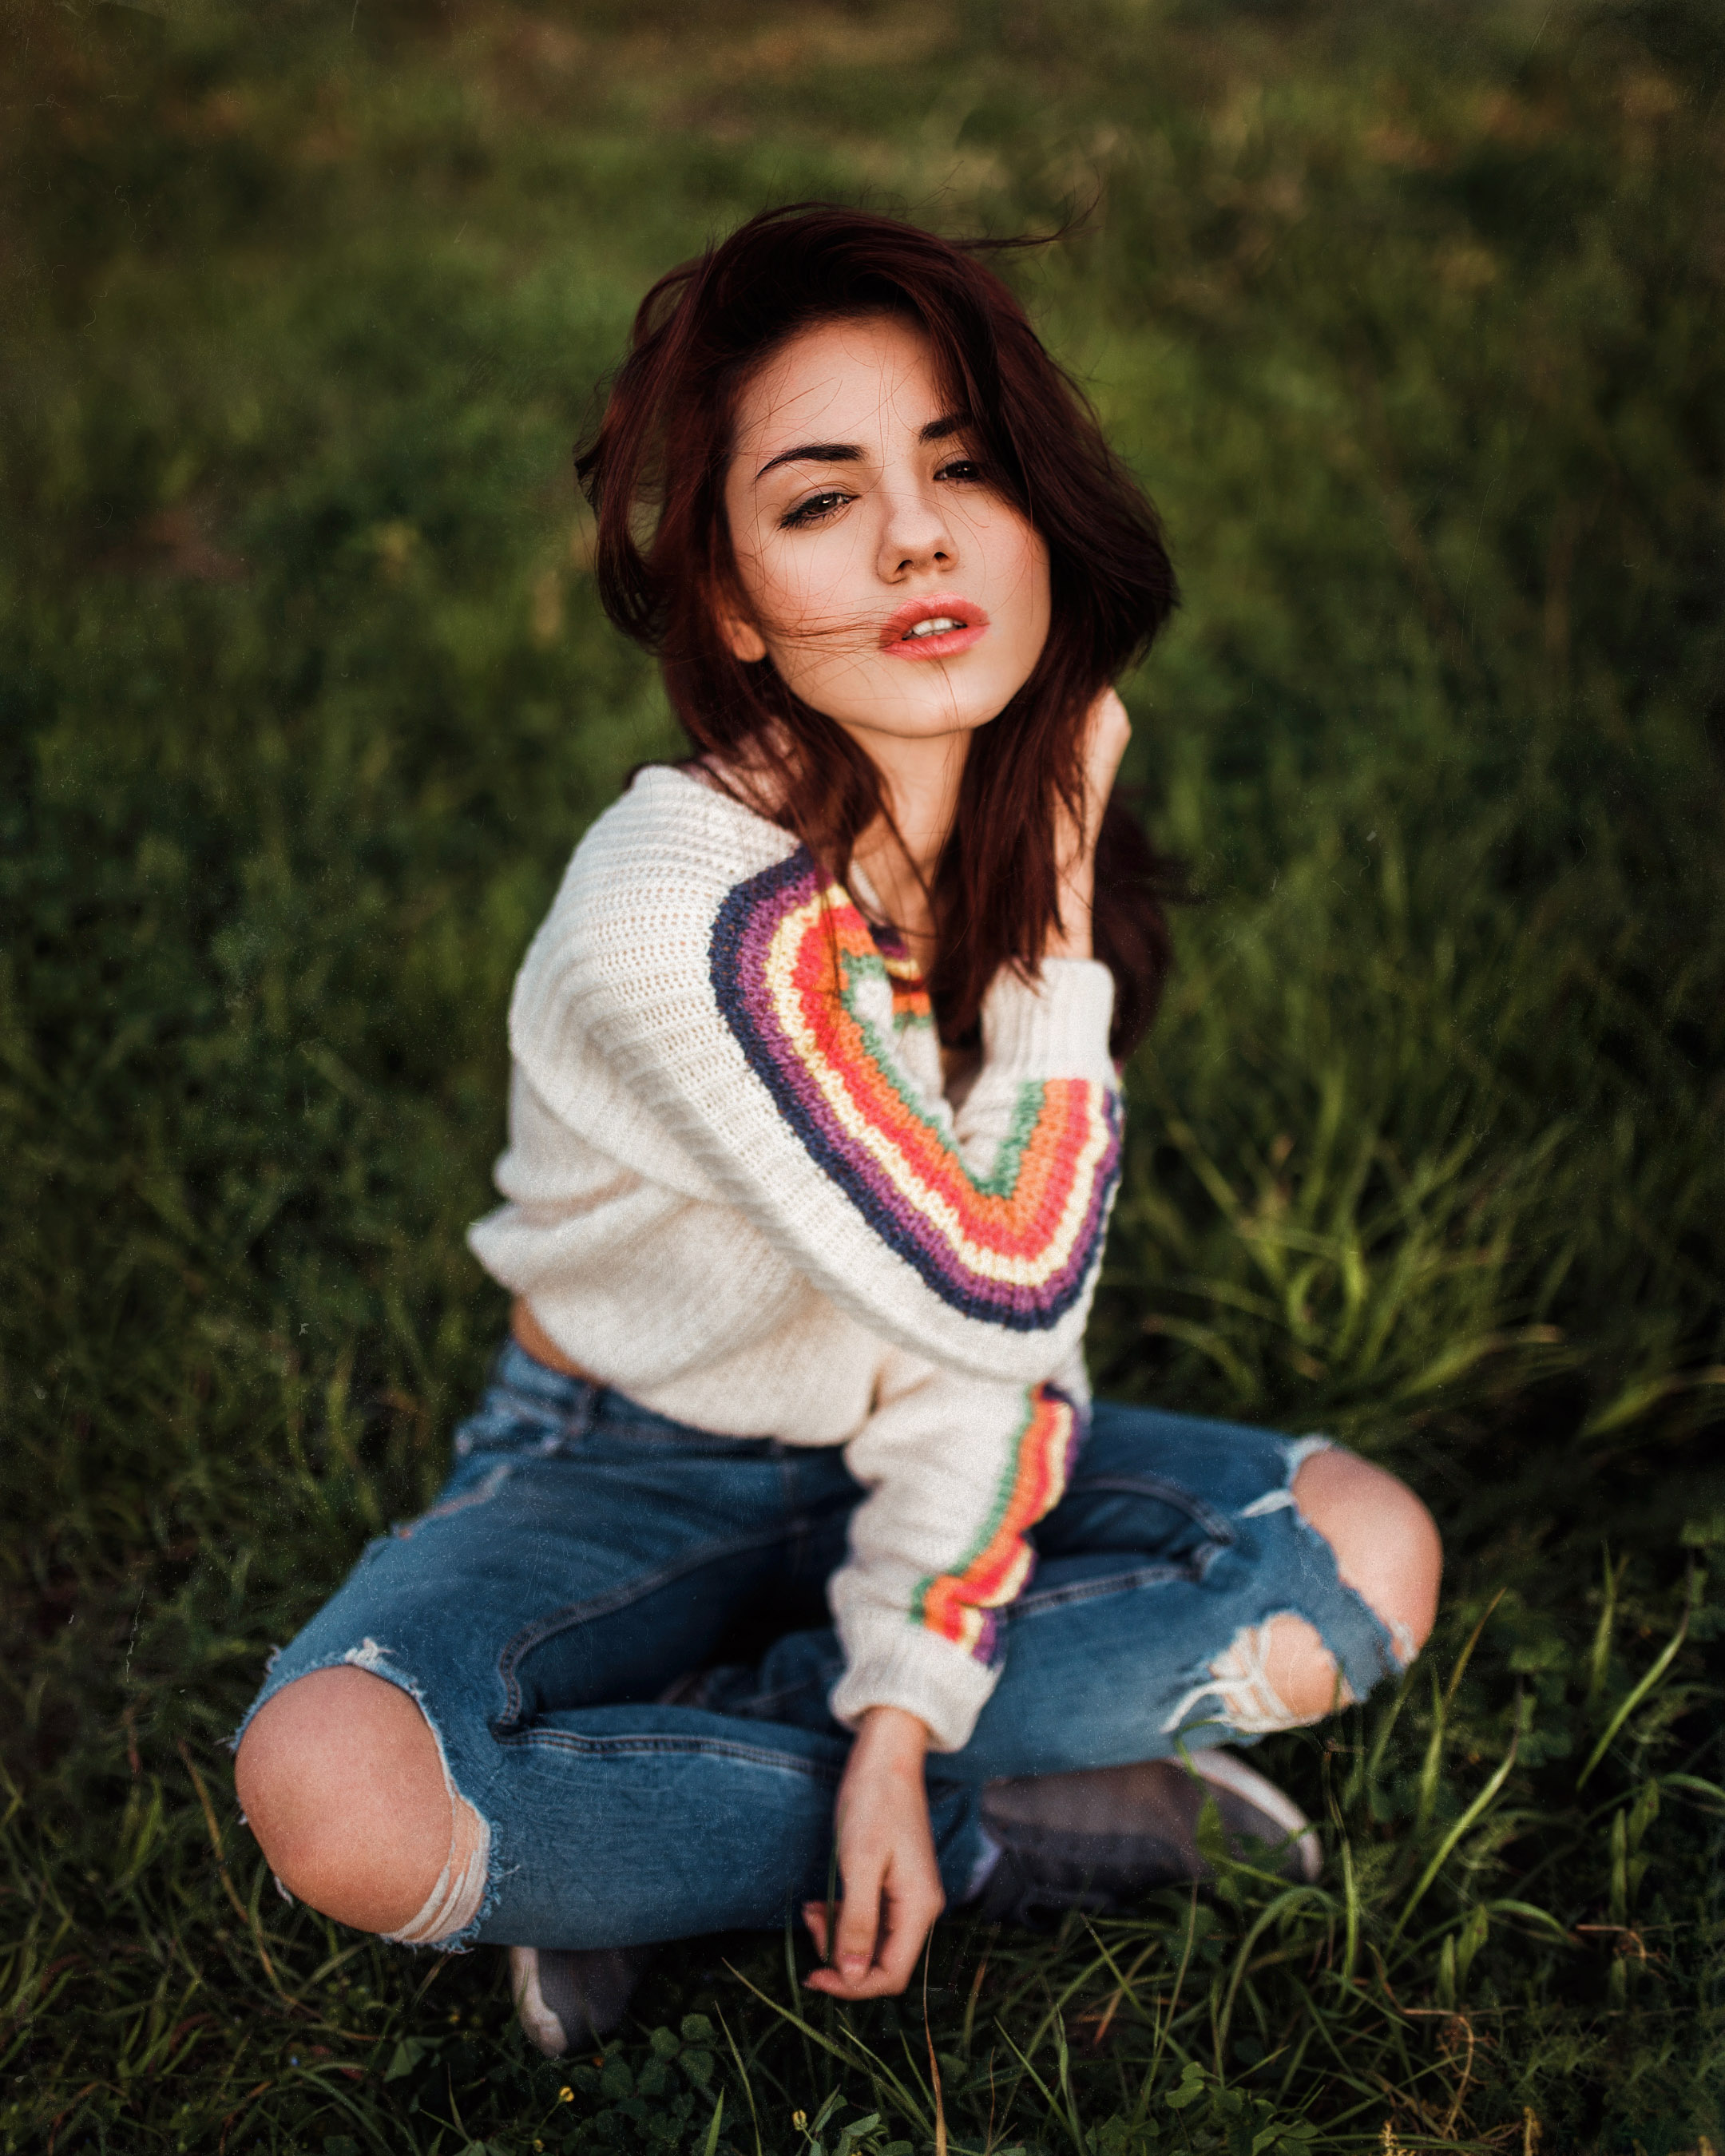 People 2160x2700 Delaia Gonzalez women model brunette hair in face touching hair looking at viewer sensual gaze parted lips sweater jeans torn jeans sitting legs crossed bokeh depth of field grass portrait display outdoors women outdoors Gustavo Terzaghi